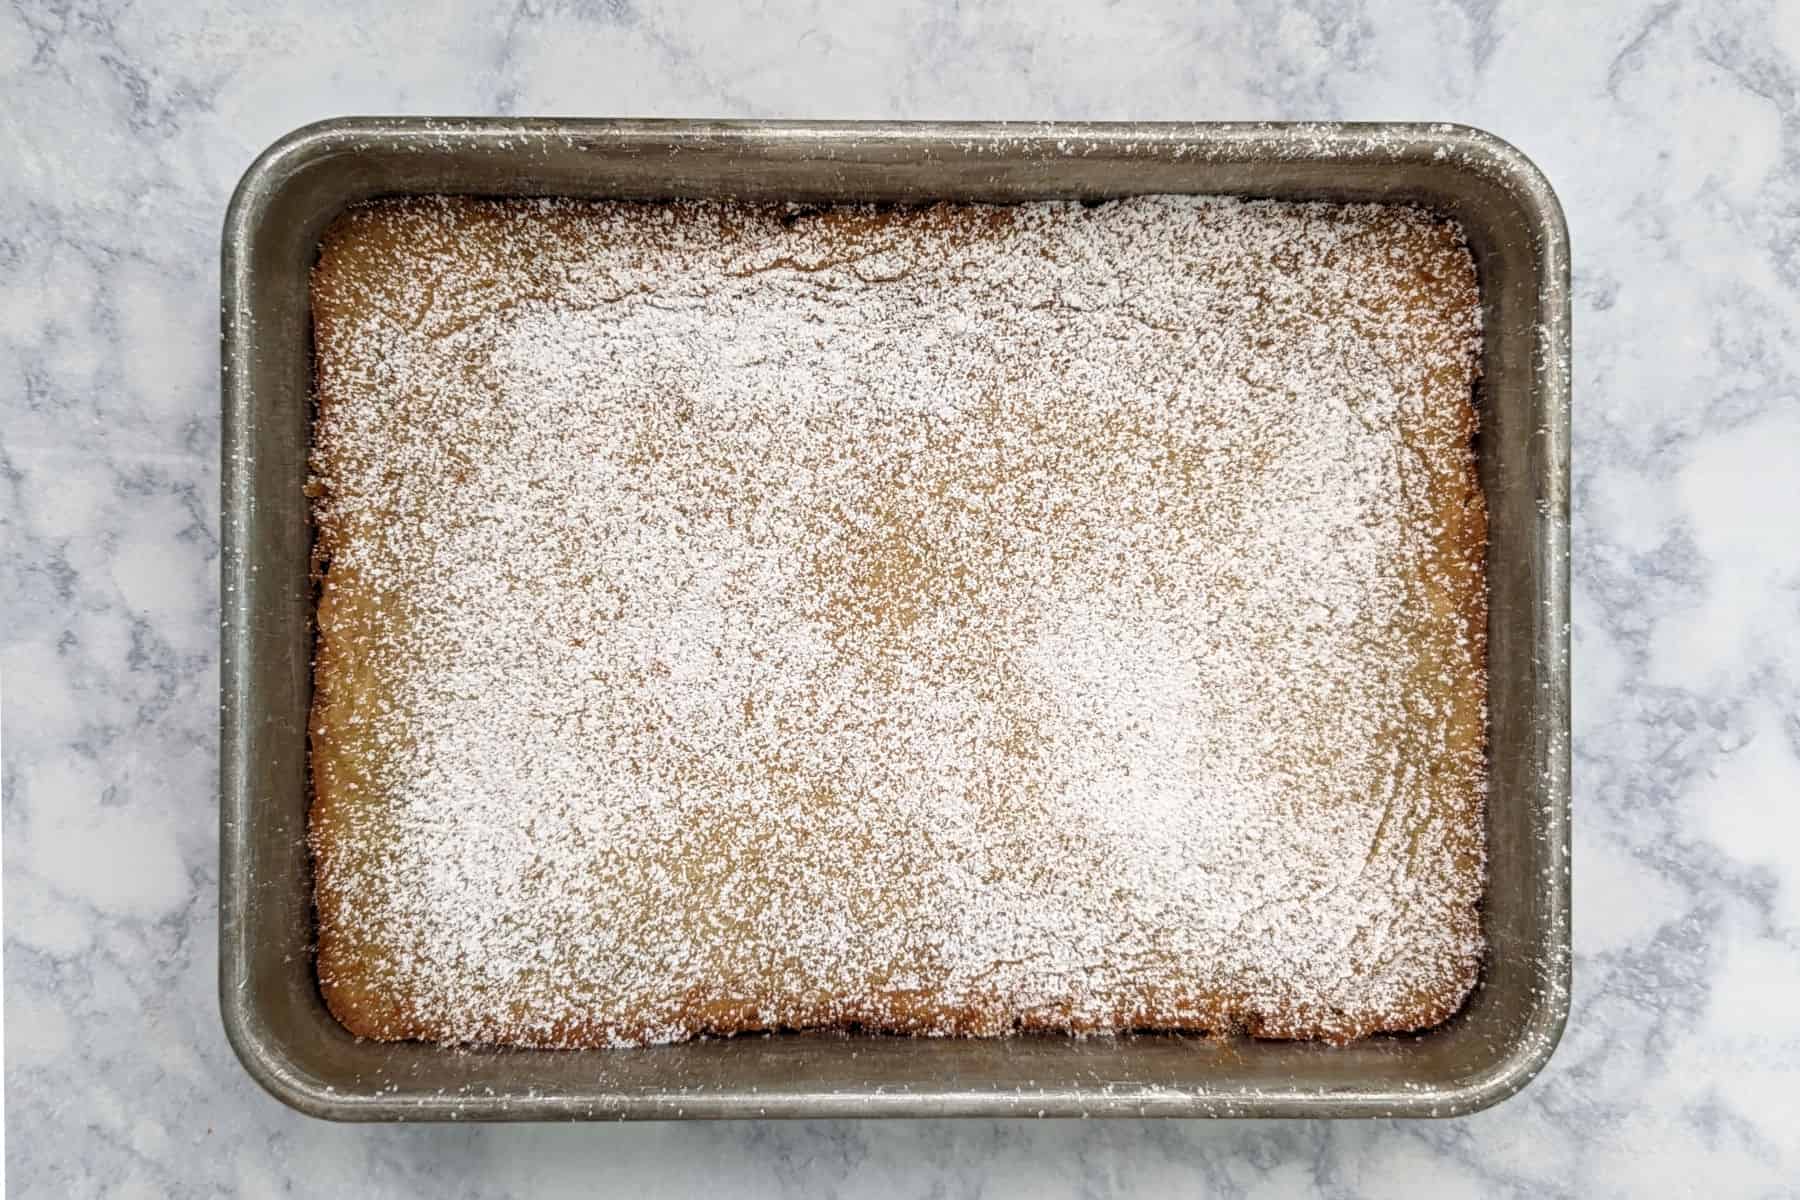 gooey butter cake, dusted with powdered sugar